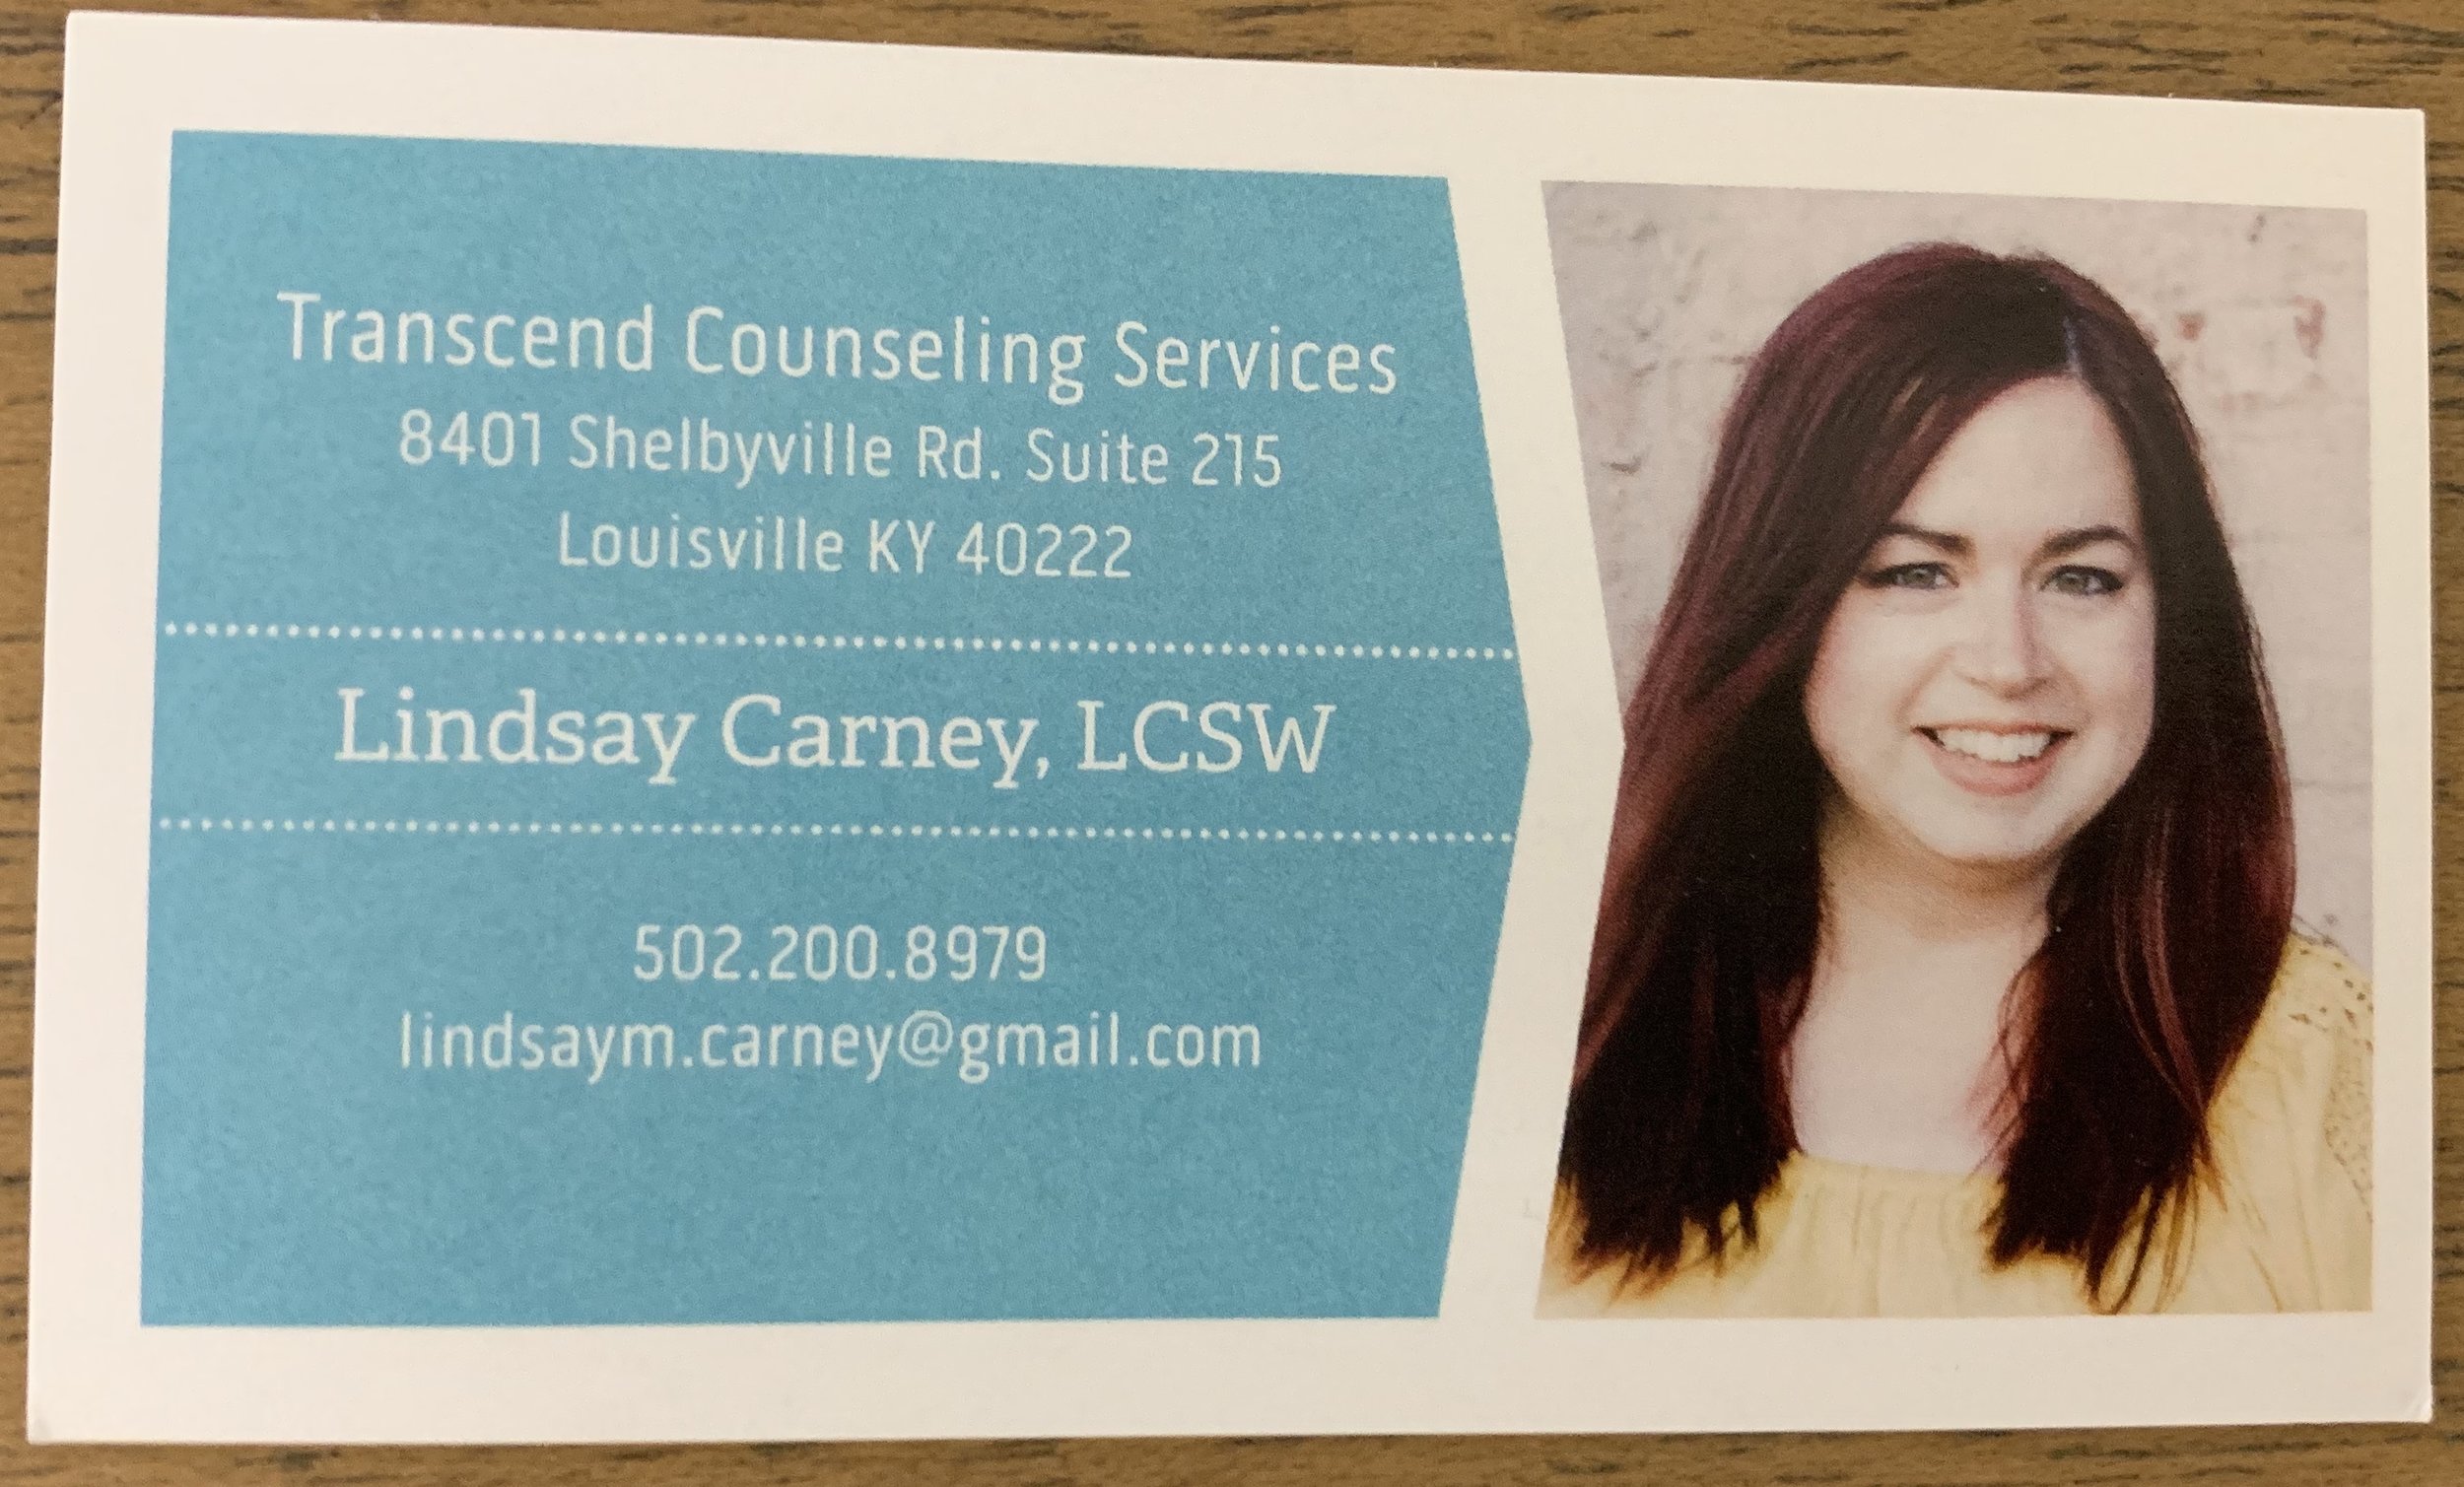 Transcend Counseling Services